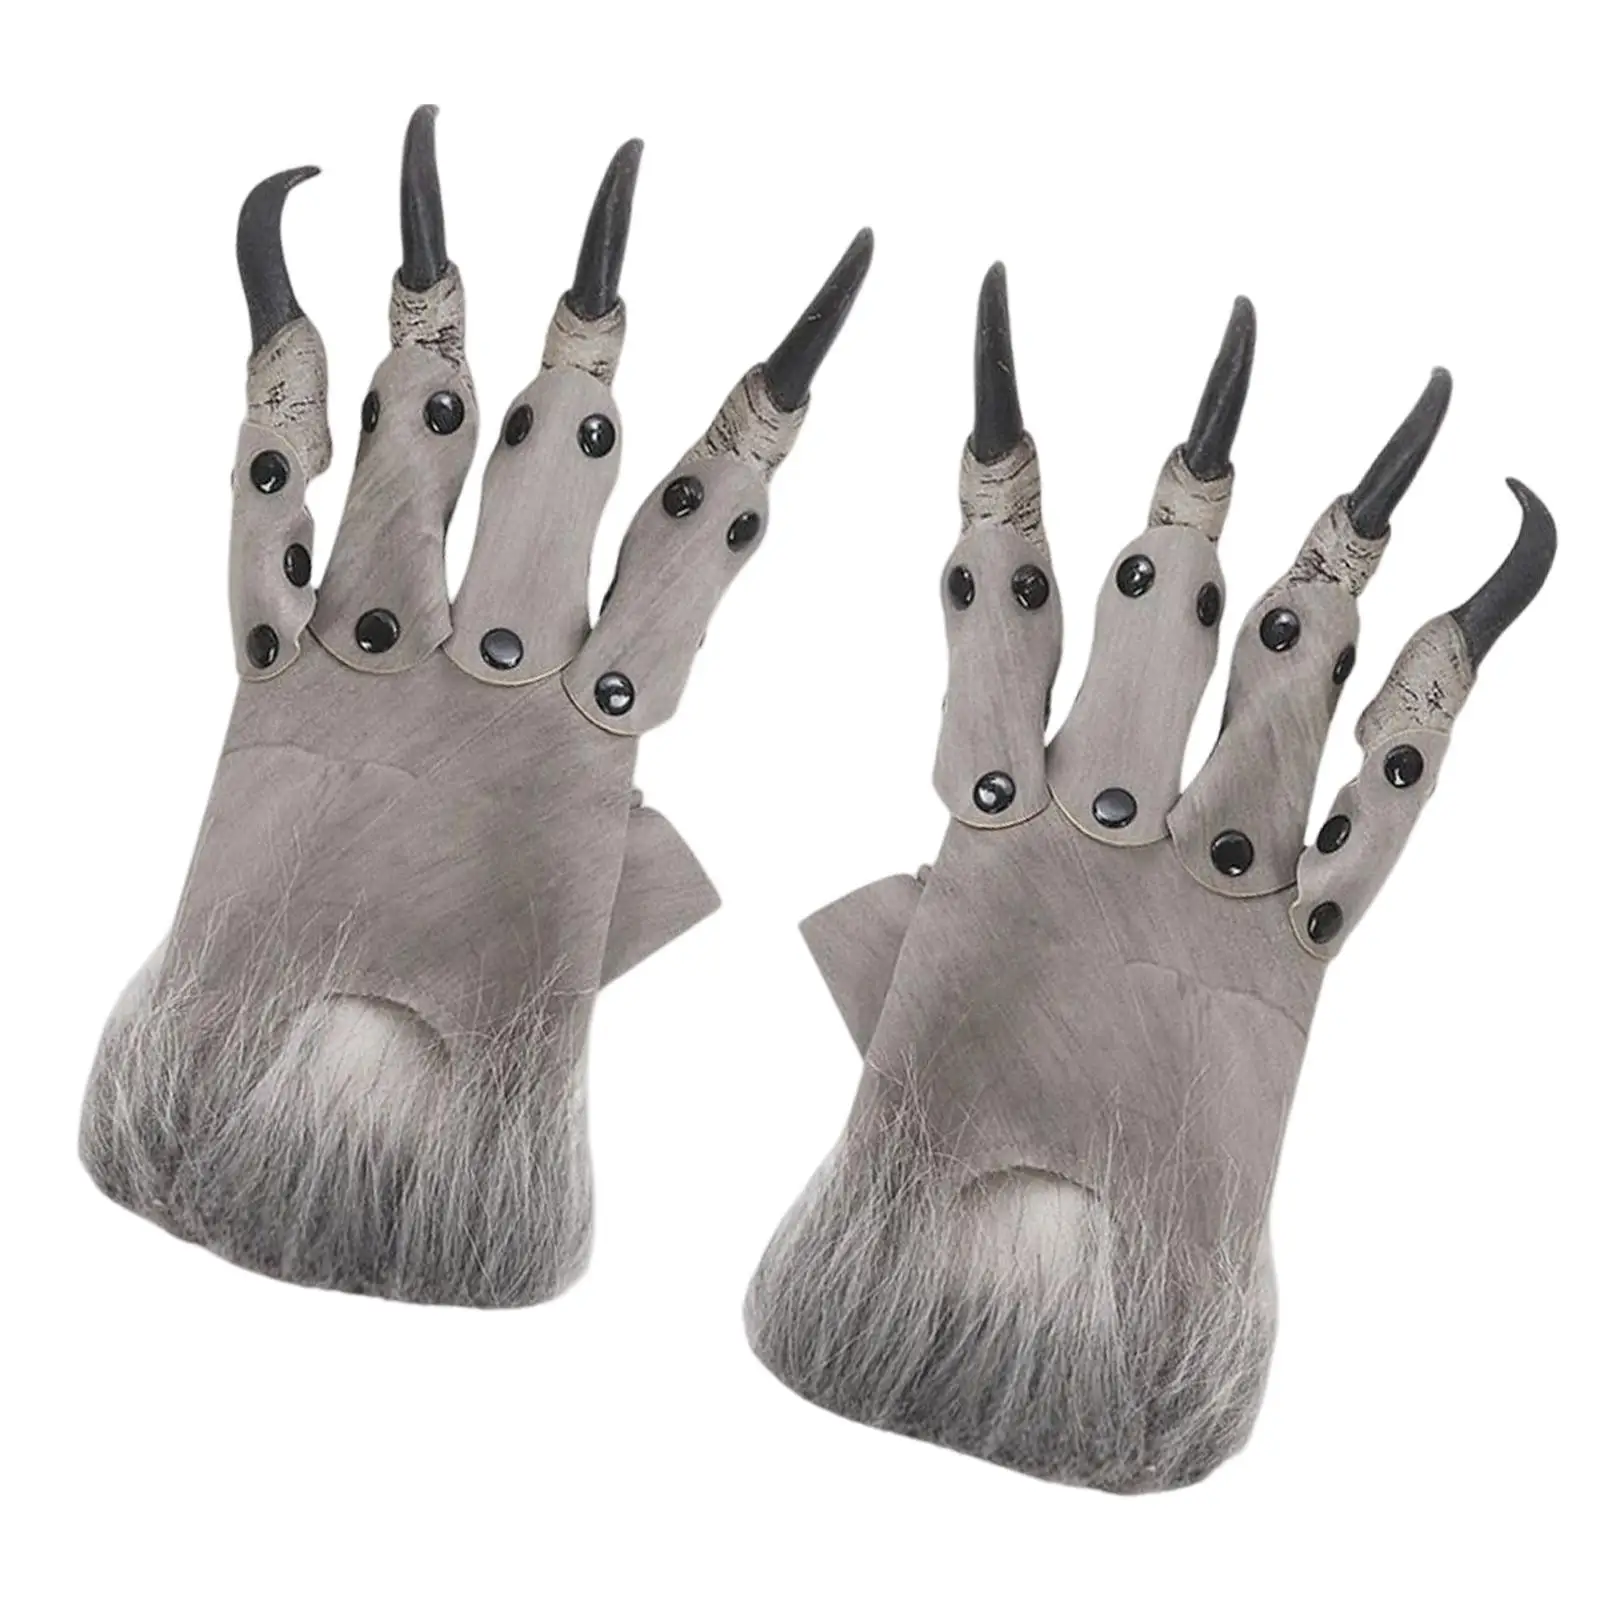 Hairy Halloween Dragon Glove Costume Claw Dress up Mitts Gift Monster Hands Paws for Carnival Fancy Dress Easter Party Props